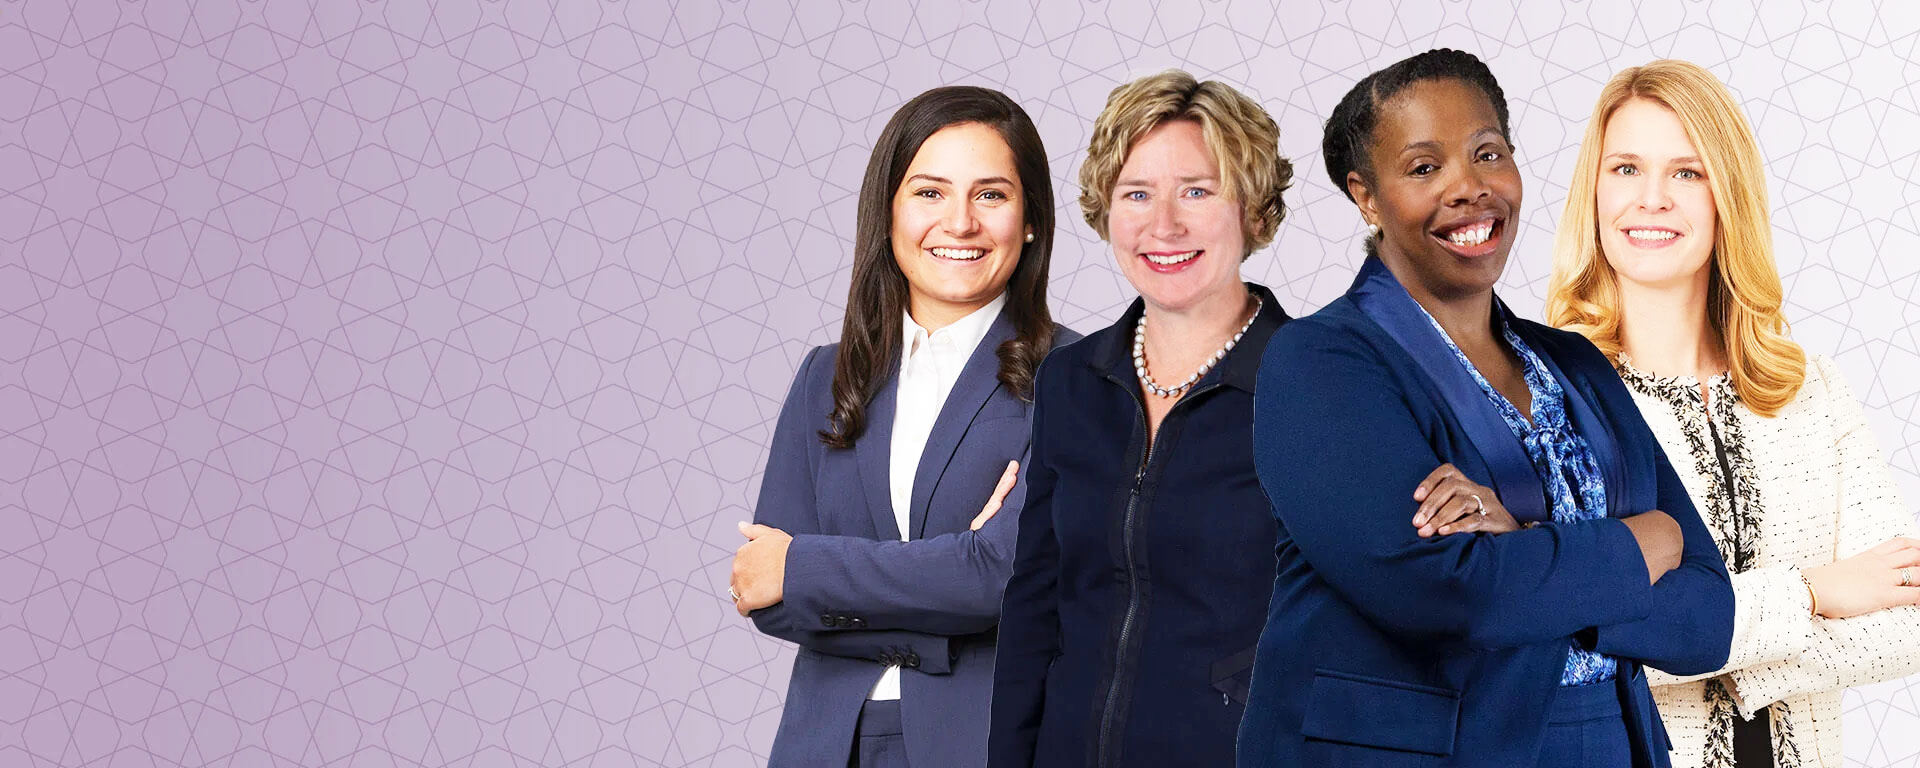 Four women in professional attire standing as a group with a purple background.